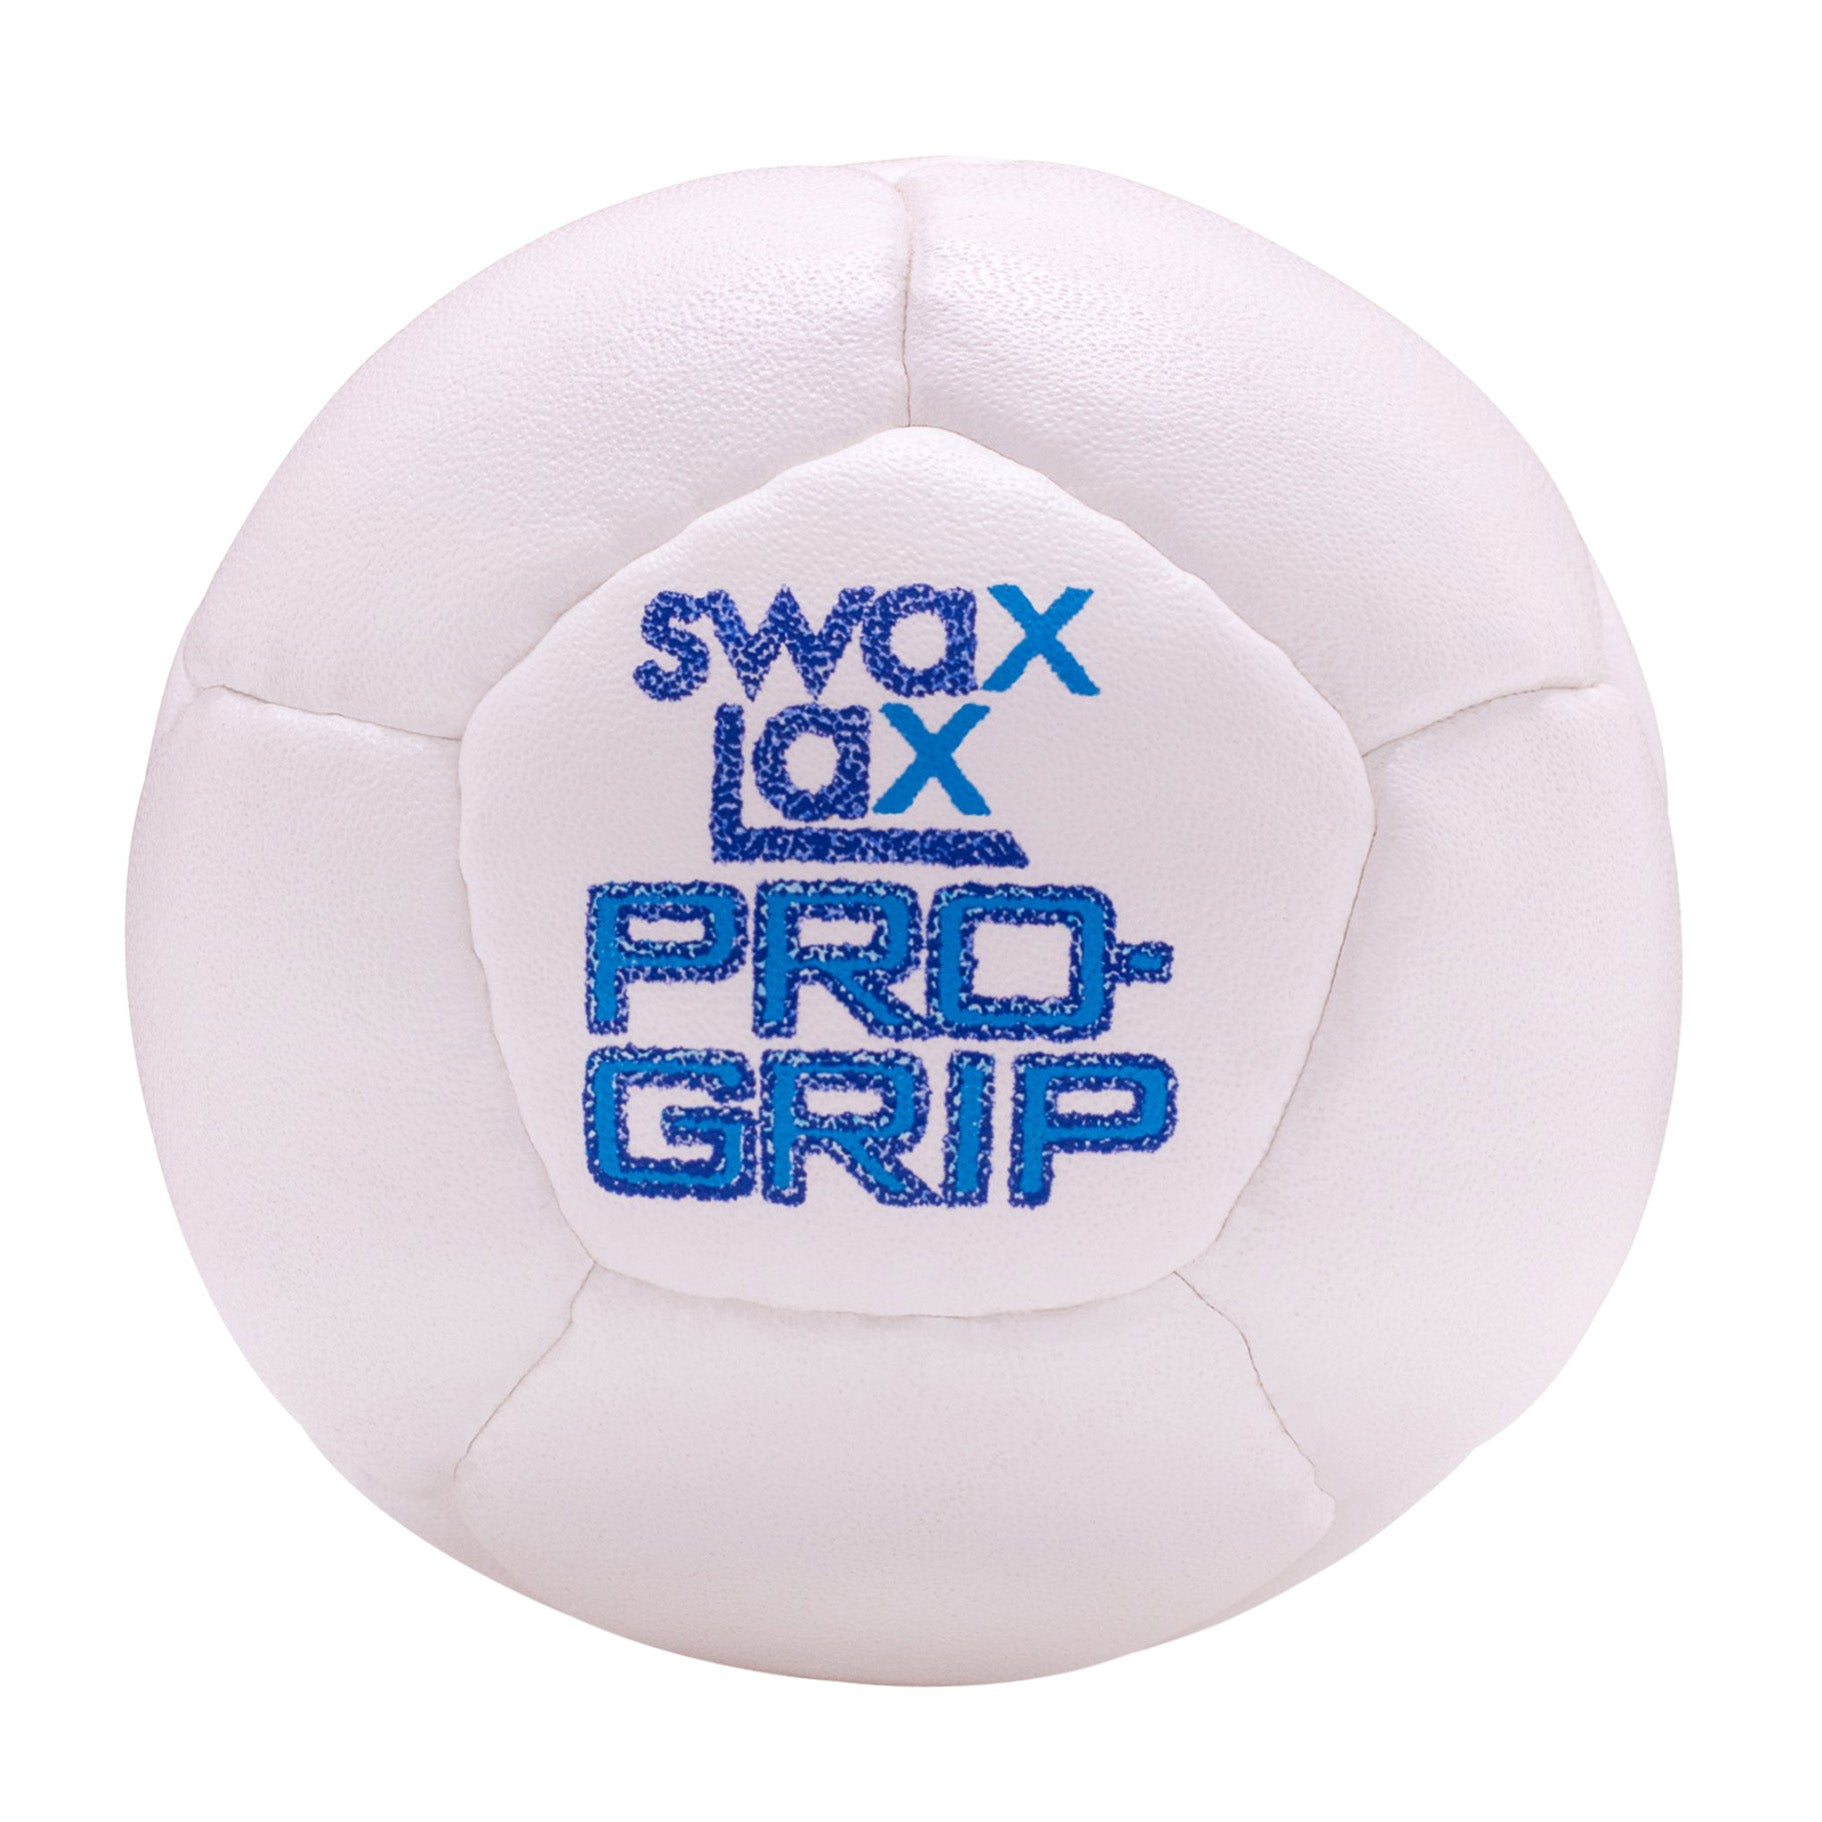 White Pro-Grip Swax Lax lacrosse training ball with tacky texture